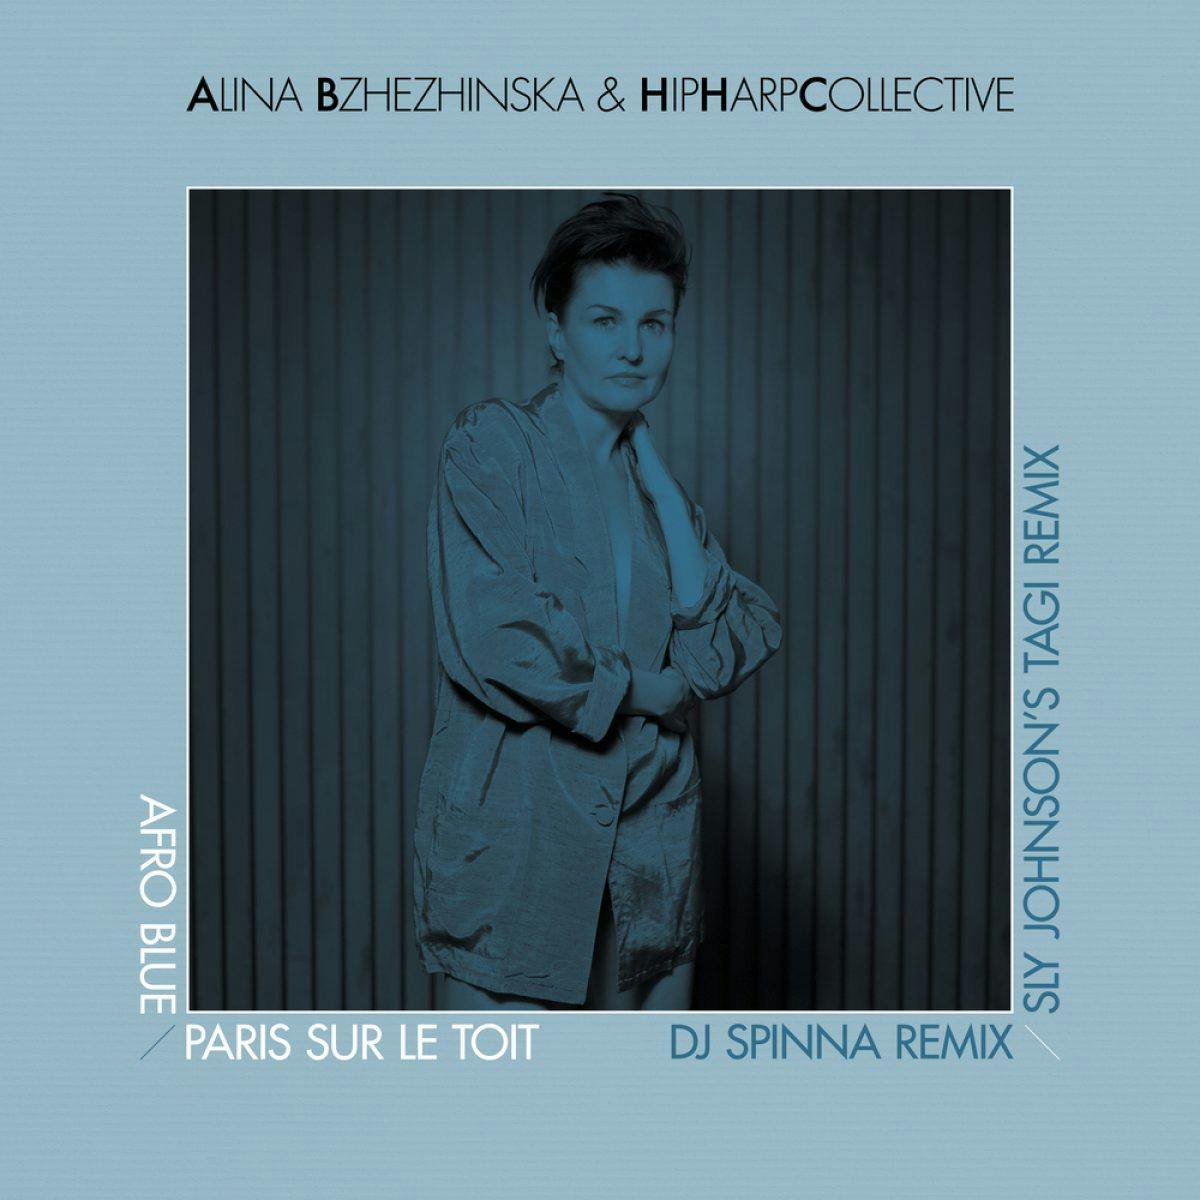 Following on from the success of the release of ‘Soul Vibrations’ in March, London based Harpist Alina Bzhezhinska and her HipHarpCollective, release two more tracks from the forthcoming BBE LP ‘Reflections‘. The tracks, ‘Paris Sur Le Toit’ and an amazing cover of the classic ‘Afro Blue’ also come with remixes and instrumentals of ‘Paris Sur Le Toit’ from Sly Johnson and DJ Spinna.